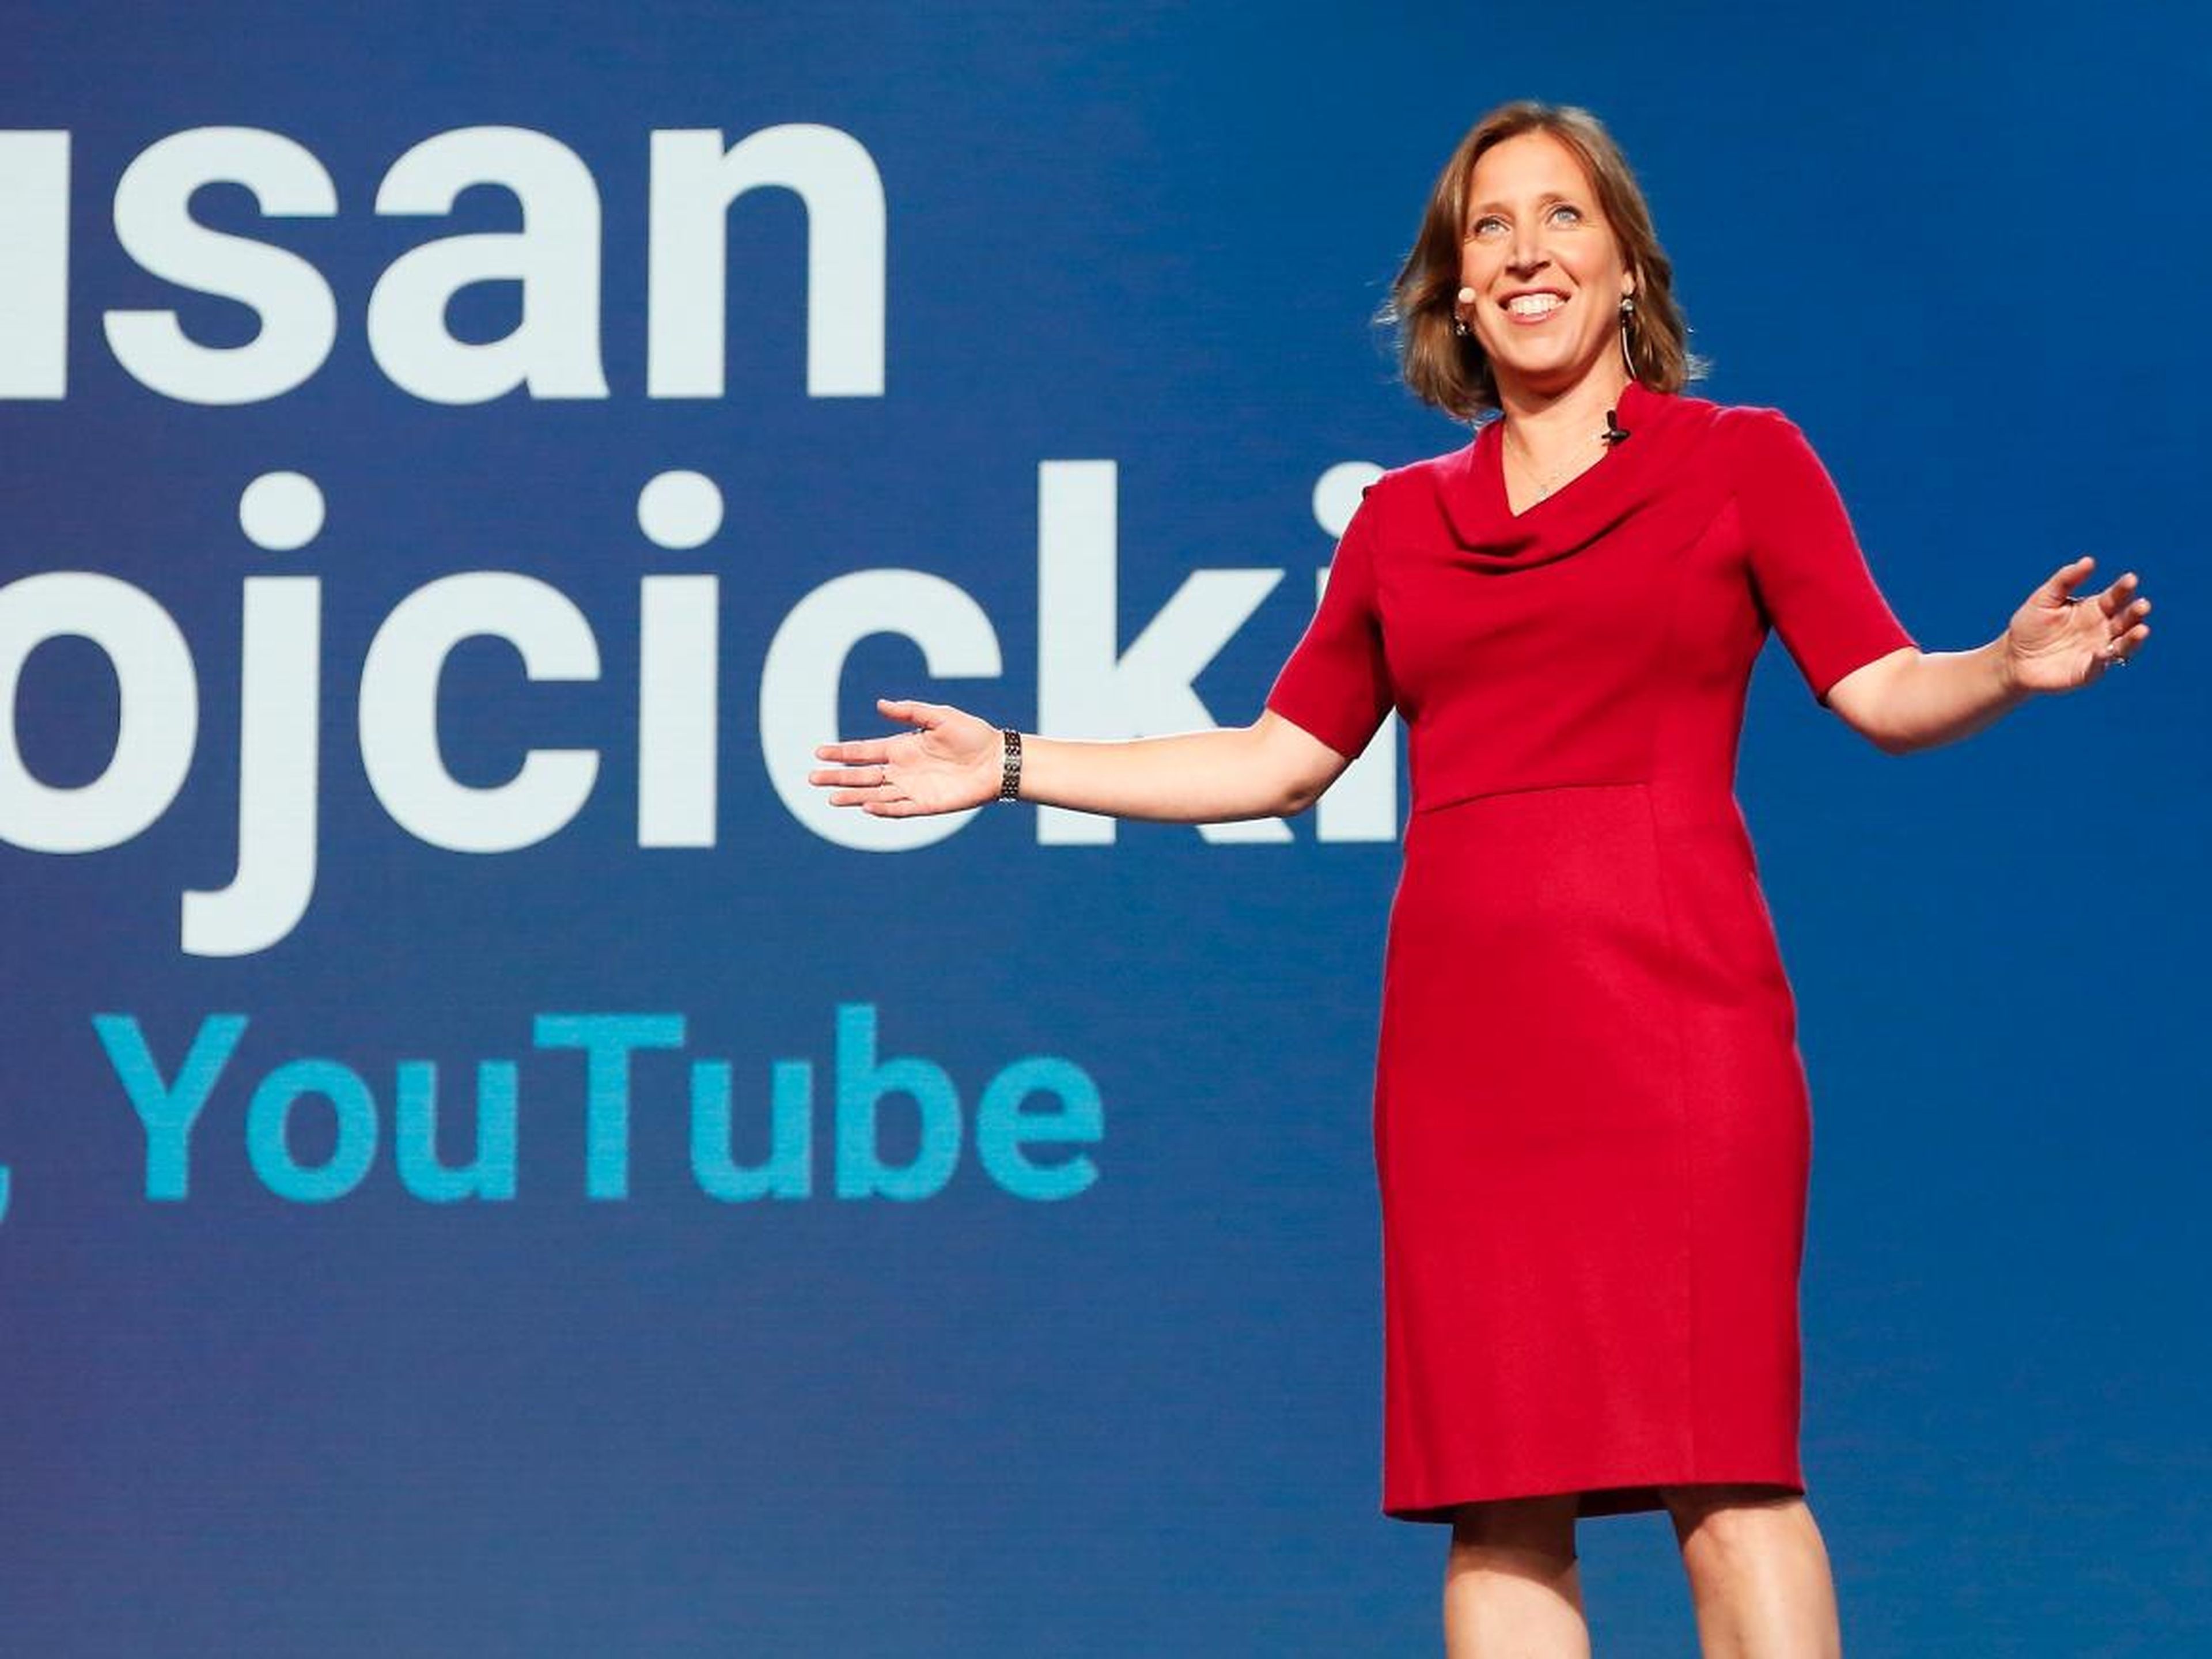 YouTube was acquired in 2006 and remains a subsidiary of Google. The video hosting site, run by Susan Wojcicki, has emerged as the world's No. 1 video-sharing site and the No. 2 most visited site on the web. Analysts estimate that